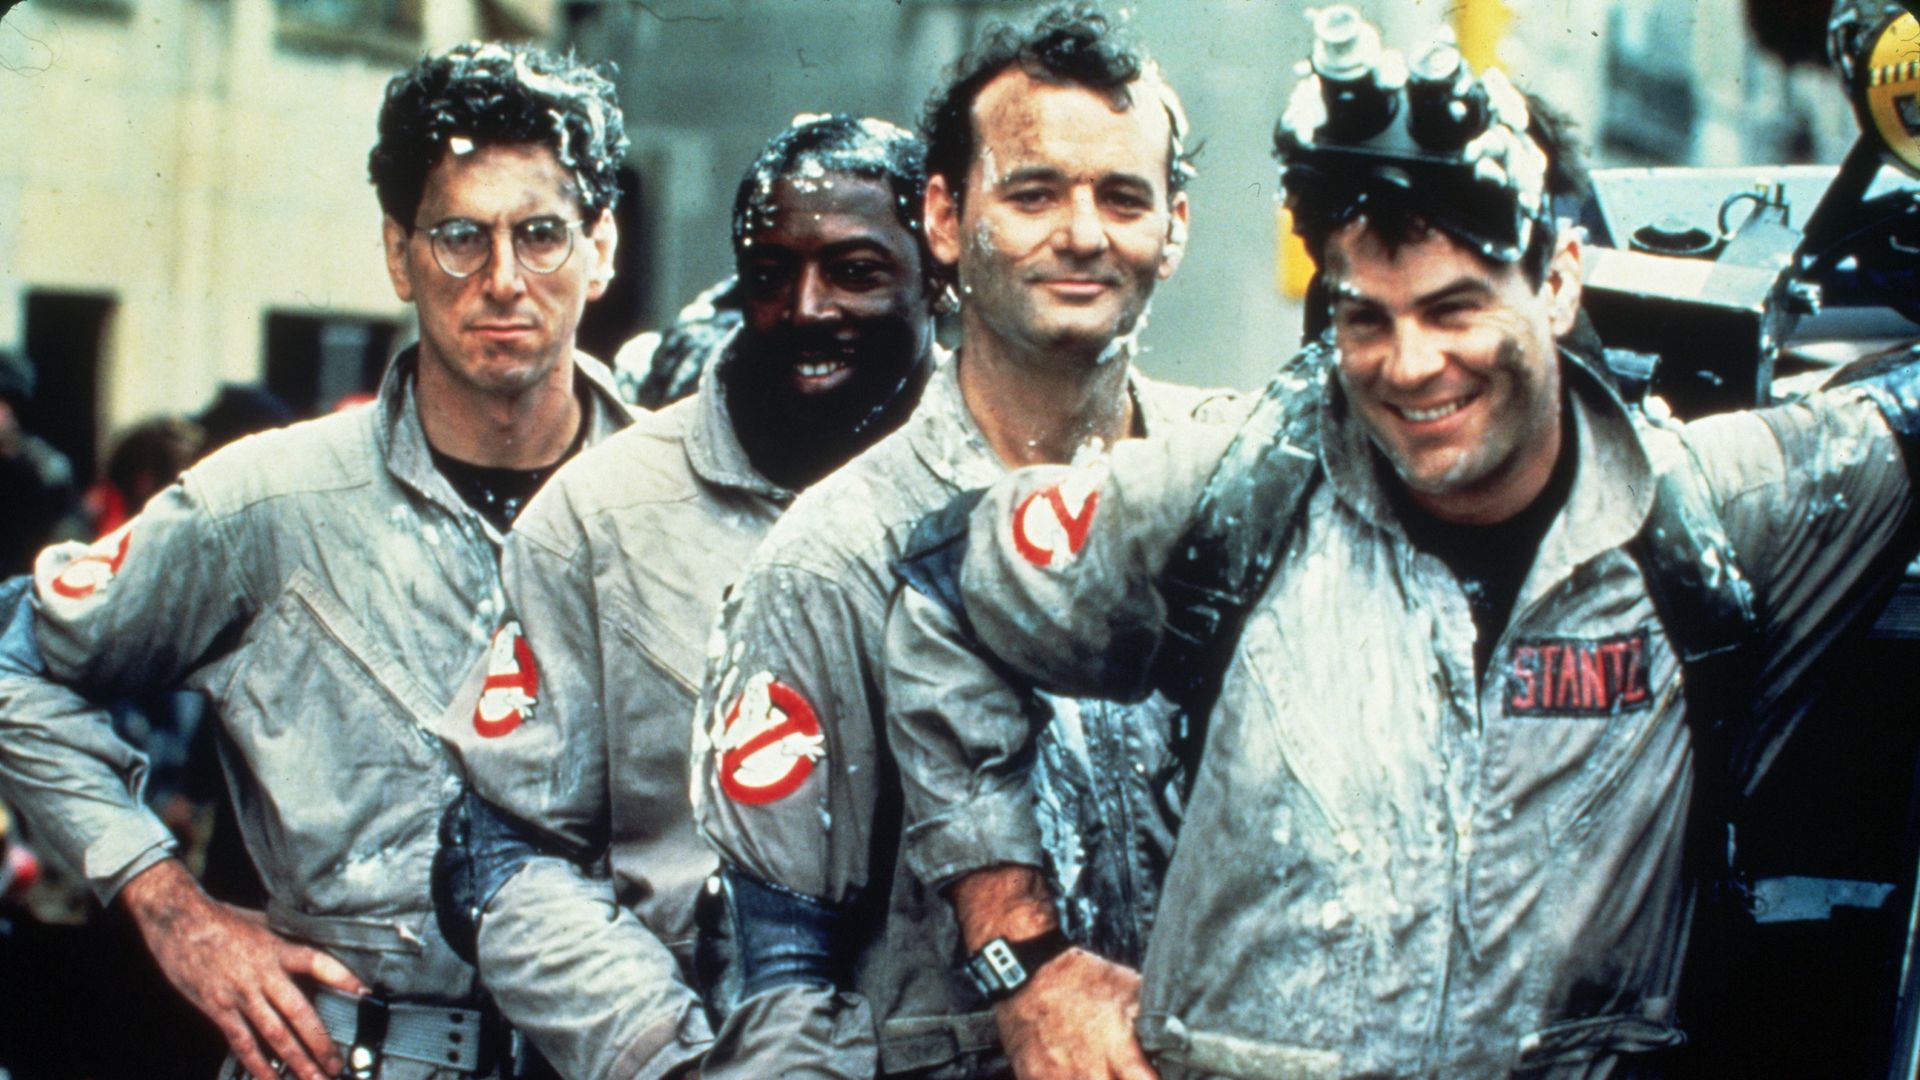 'Ghostbusters-style' devices could be given to police...